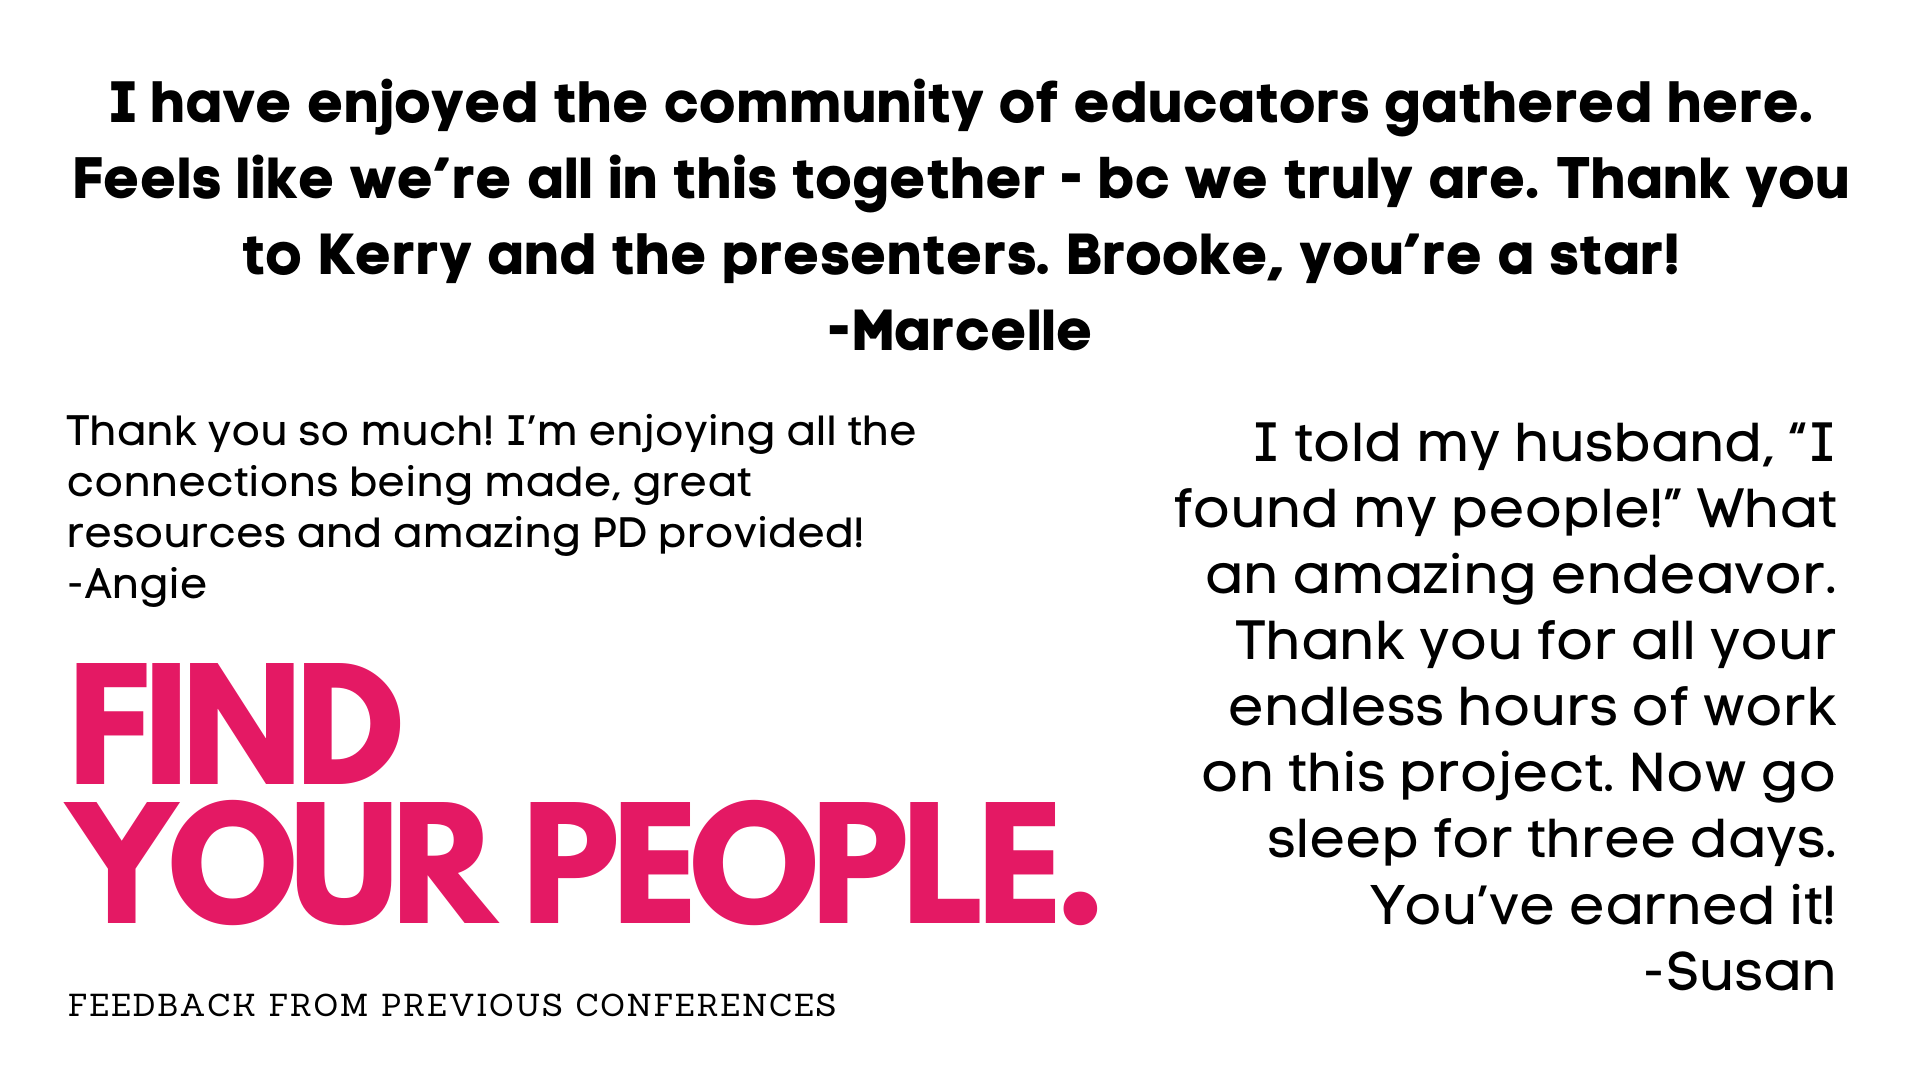 Community - I have enjoyed the community of educators gathered here. Feels like we're all in this together - bc we truly are. Thank you to Kerry and the presenters. Brooke, you're a star! - Marcelle